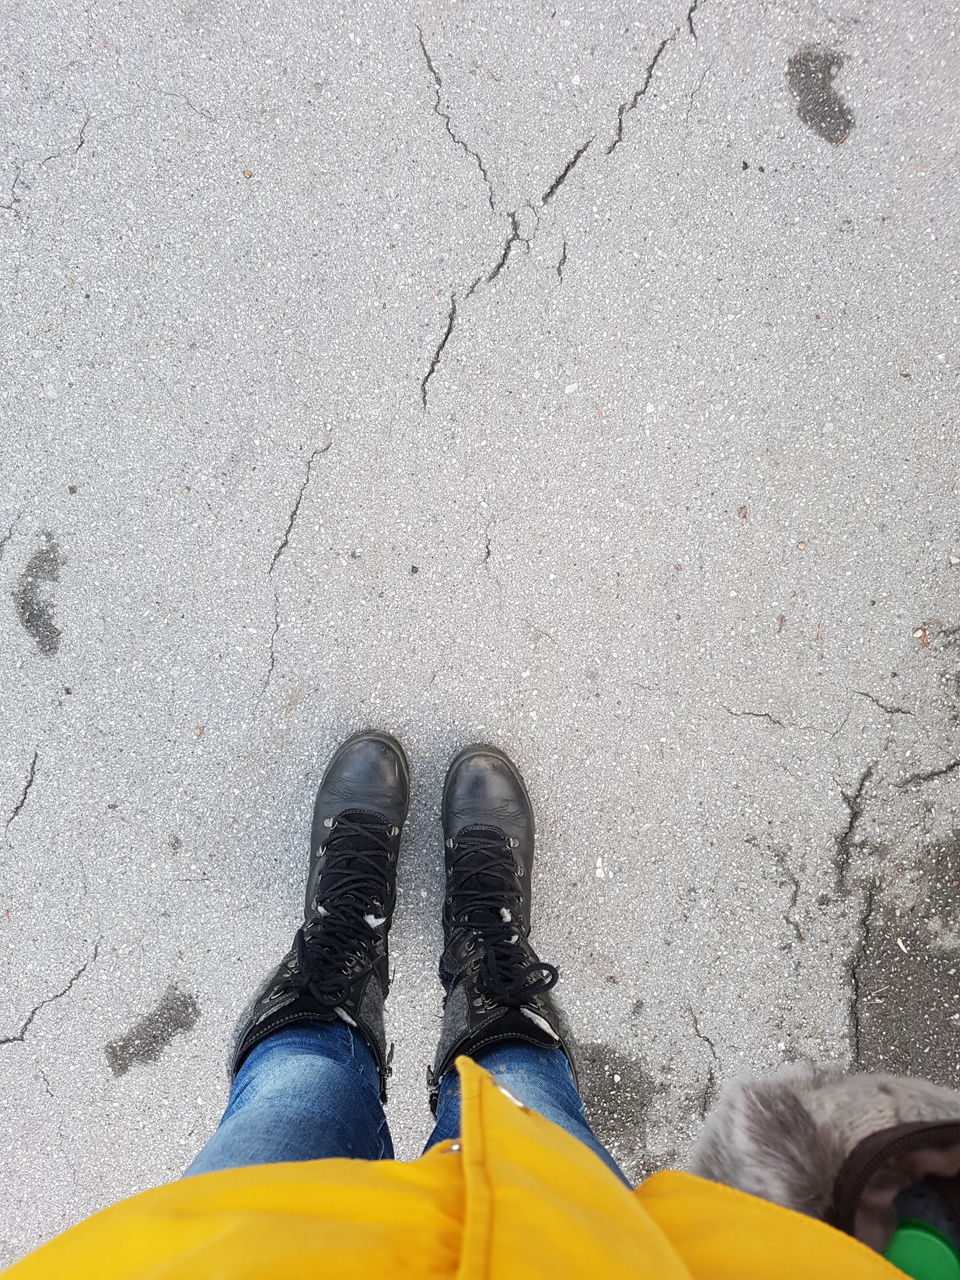 yellow, one person, low section, human leg, shoe, high angle view, lifestyles, day, footwear, asphalt, standing, leisure activity, men, outdoors, nature, limb, human limb, street, city, land, adult, road, clothing, personal perspective, casual clothing